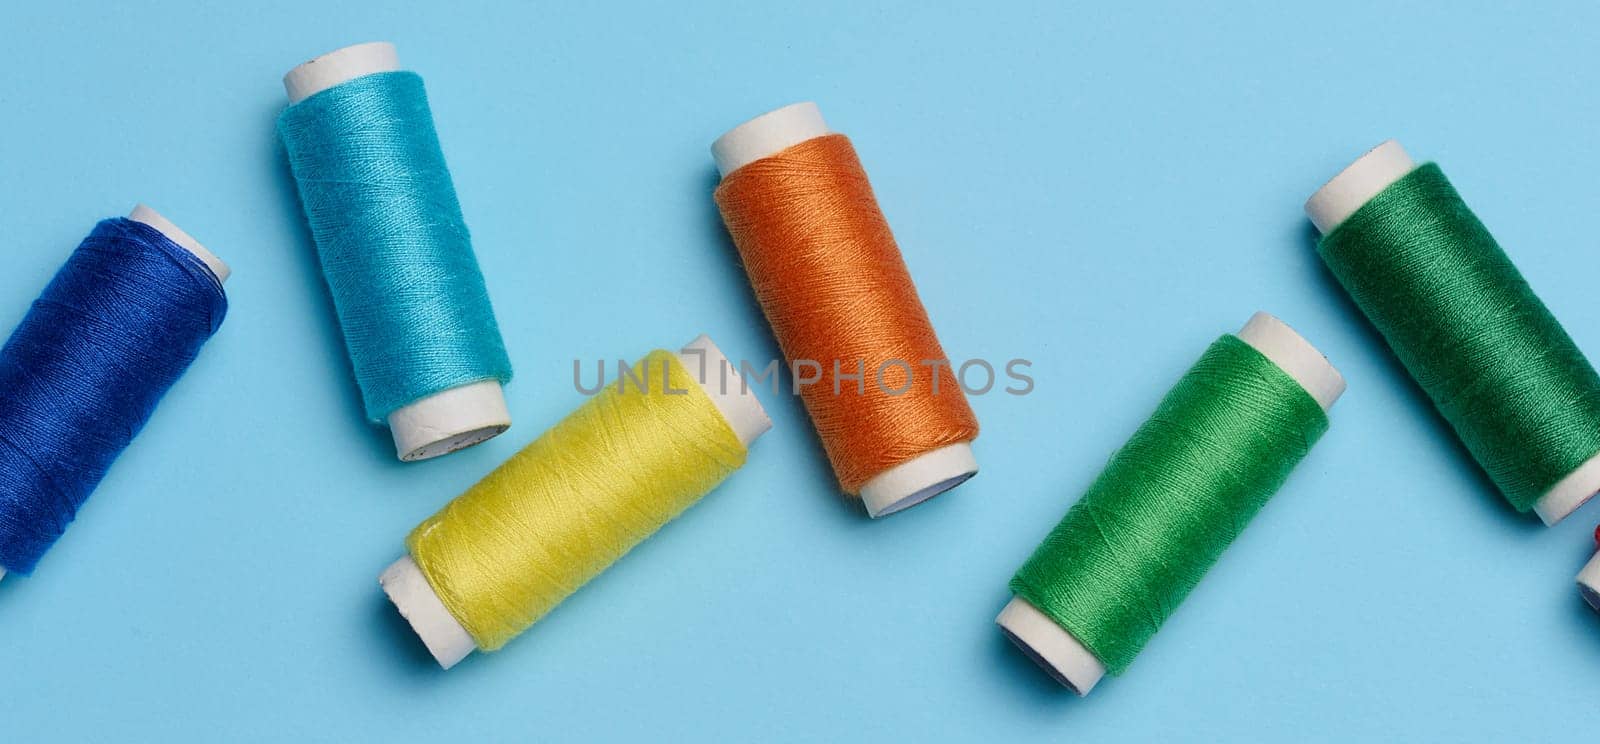 Multicolored spools of sewing threads on a blue background, top view by ndanko